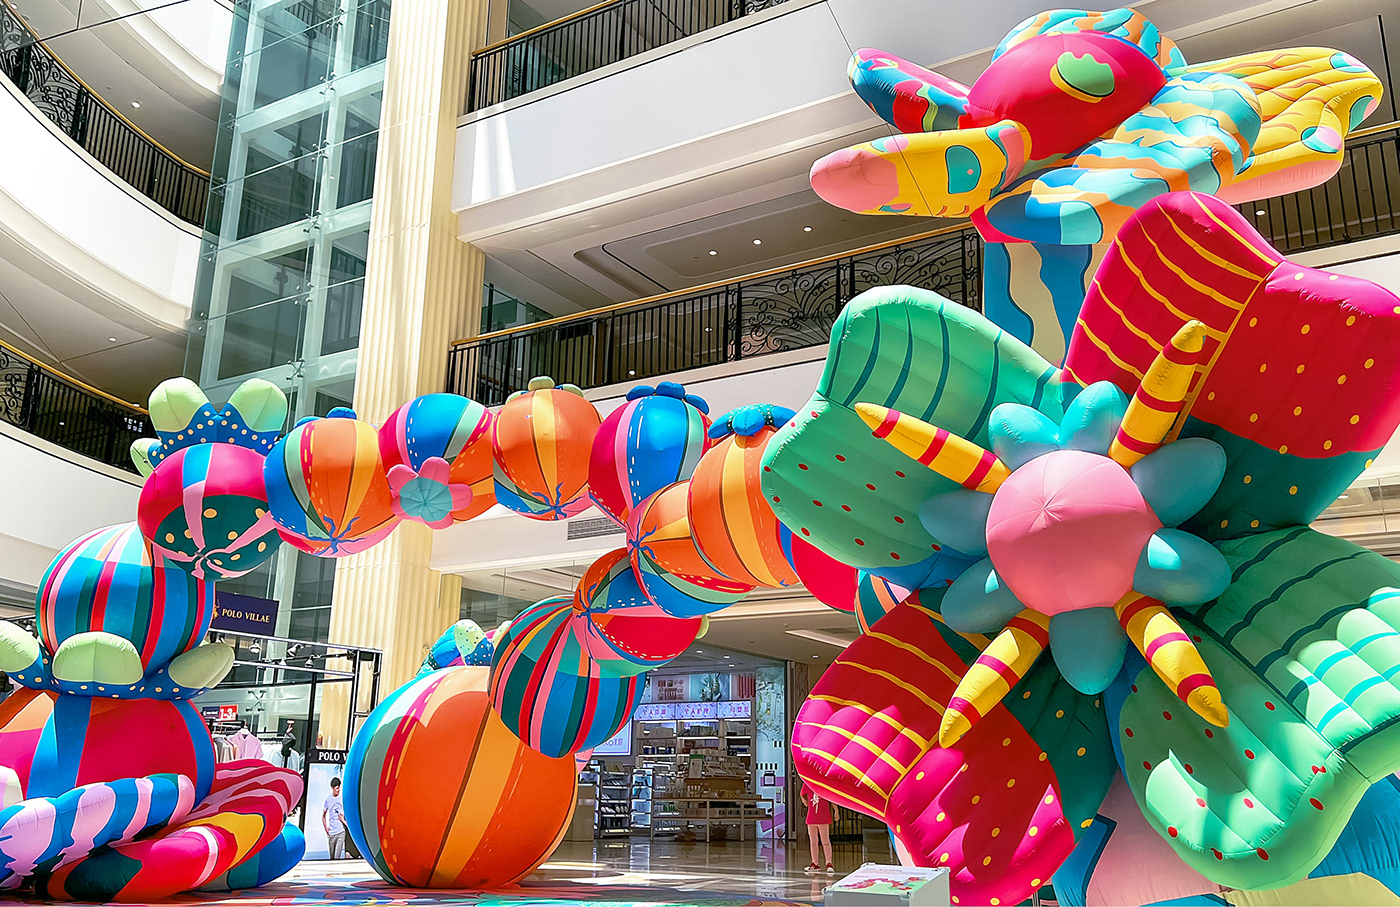 A giant inflatable instillation designed by Sam Wilde made of colourful fruit and flower sculptures.